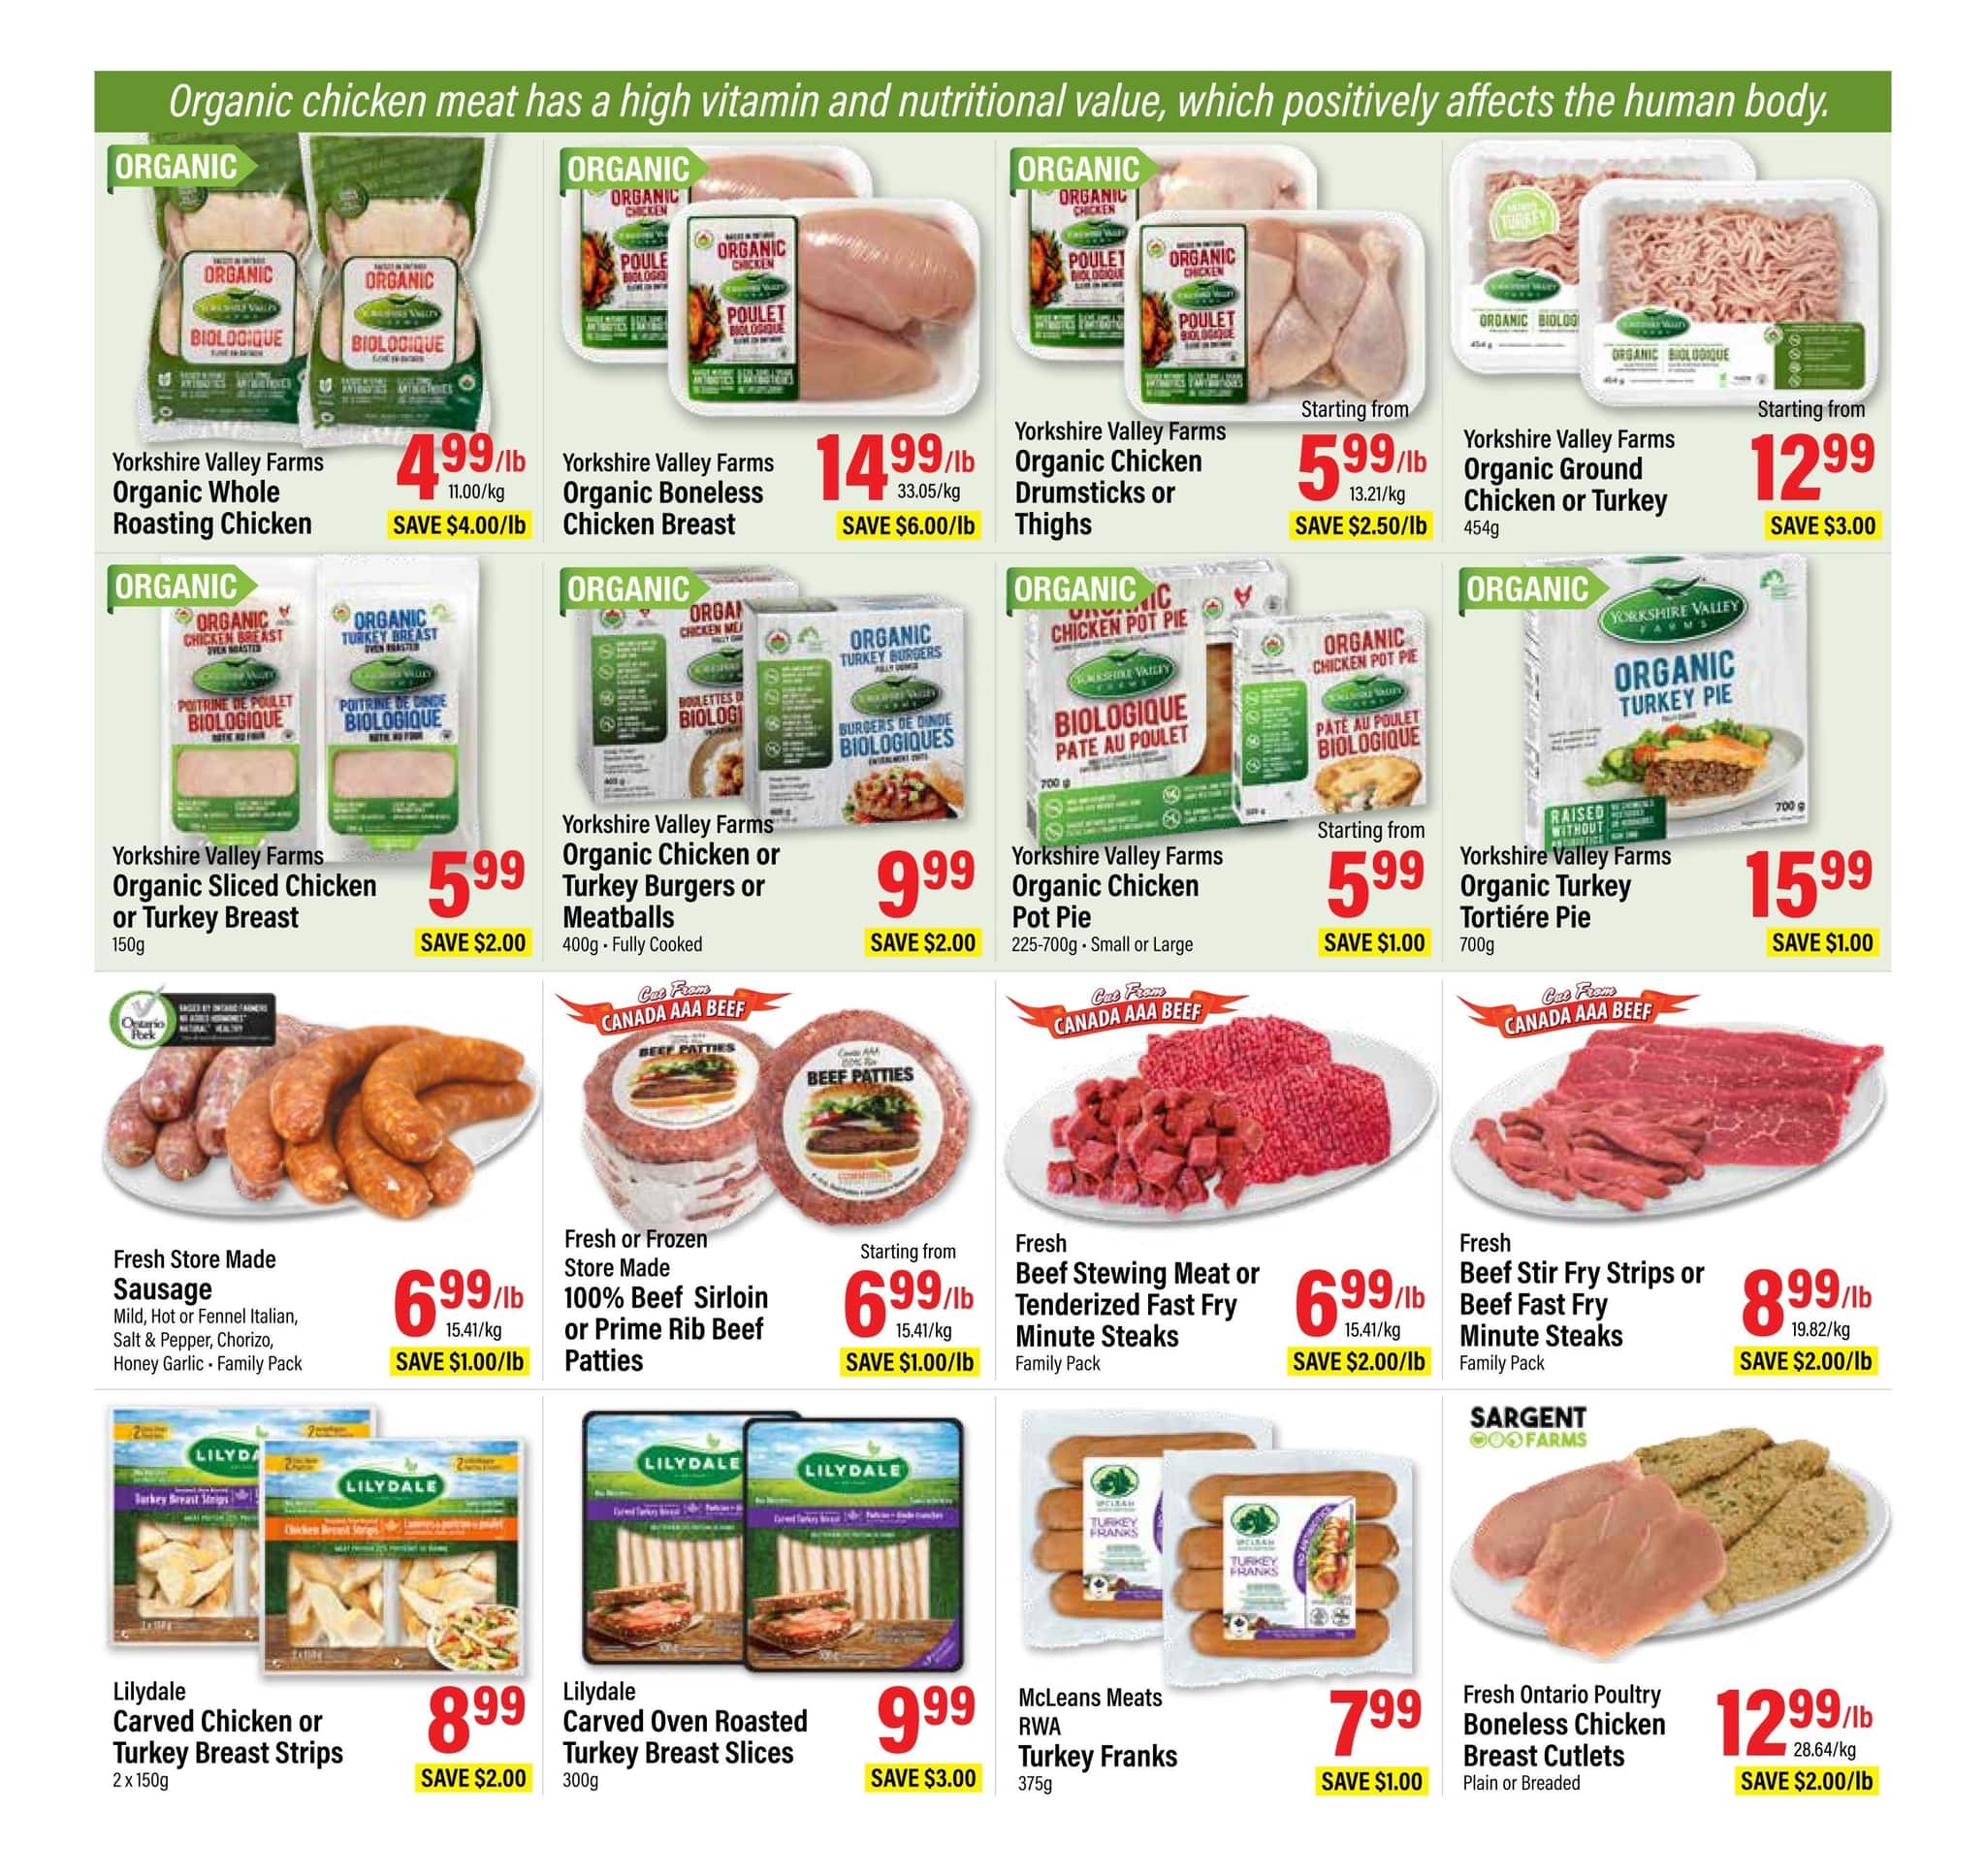 Commisso's Fresh Foods - Weekly Flyer Specials - Page 5